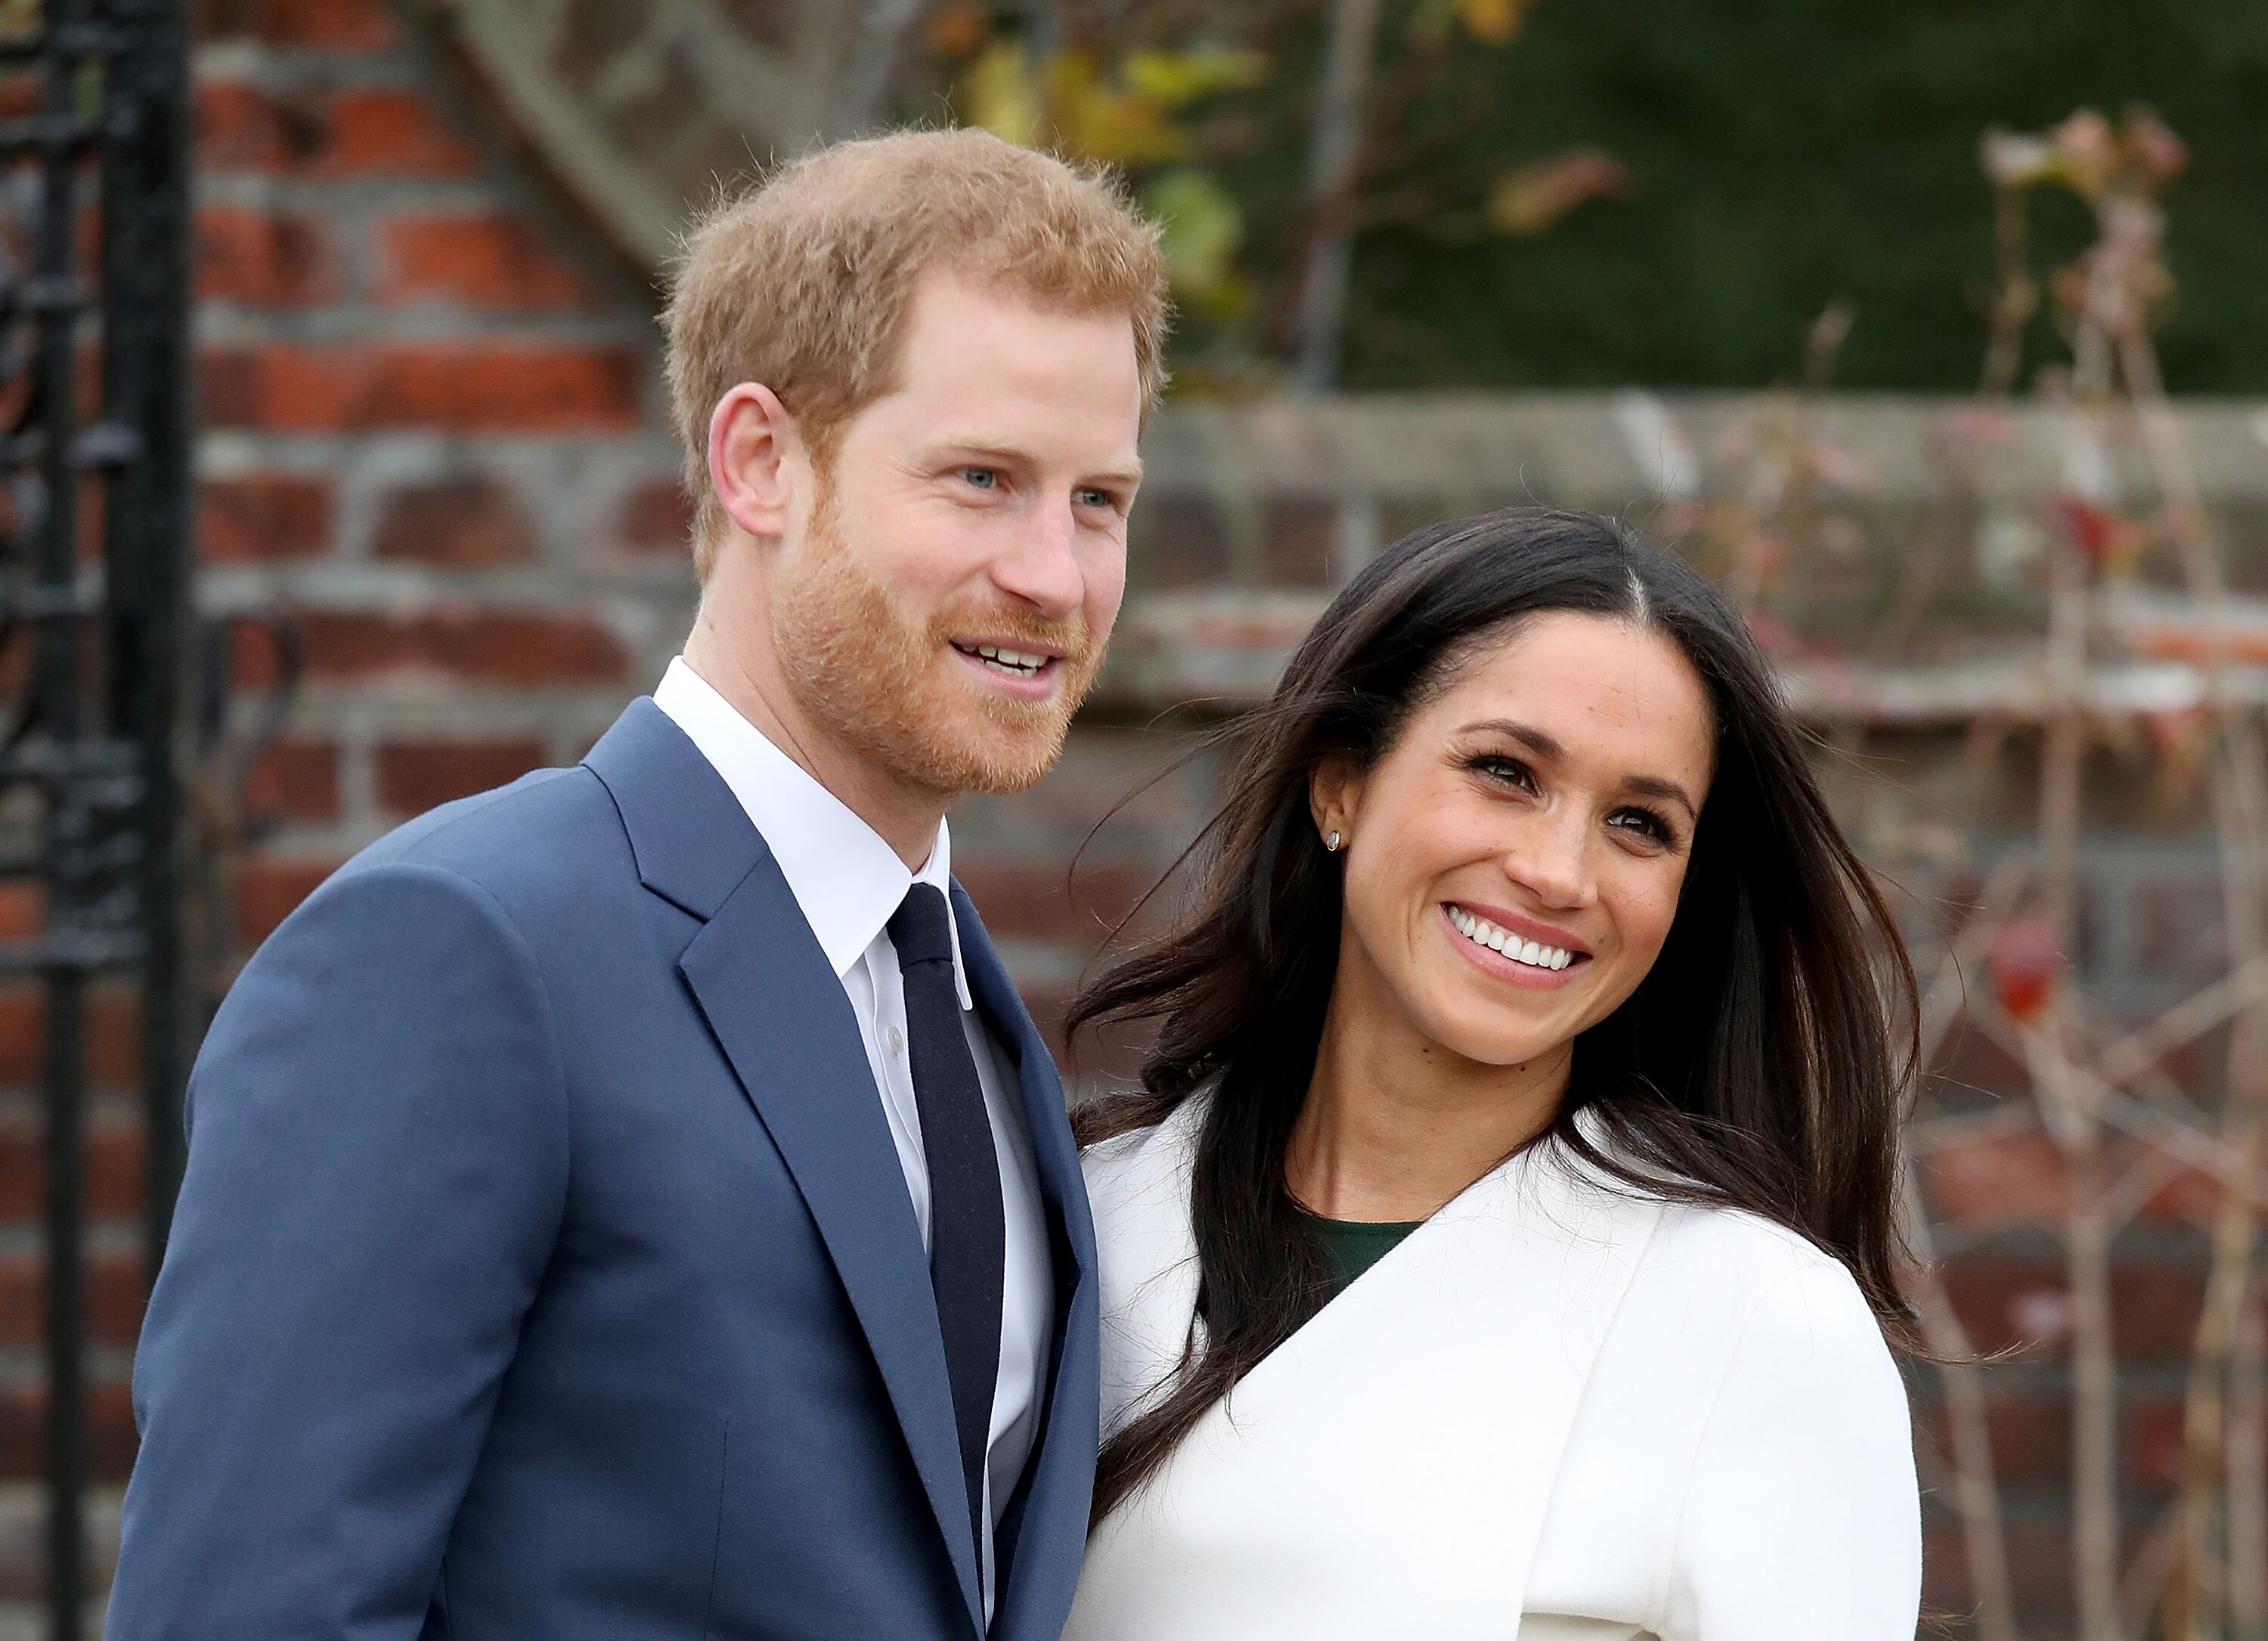 Prince Harry and actress Meghan Markle during an official photocall to announce their engagement at The Sunken Gardens at Kensington Palace on November 27, 2017 in London, England. | Photo: Getty Images